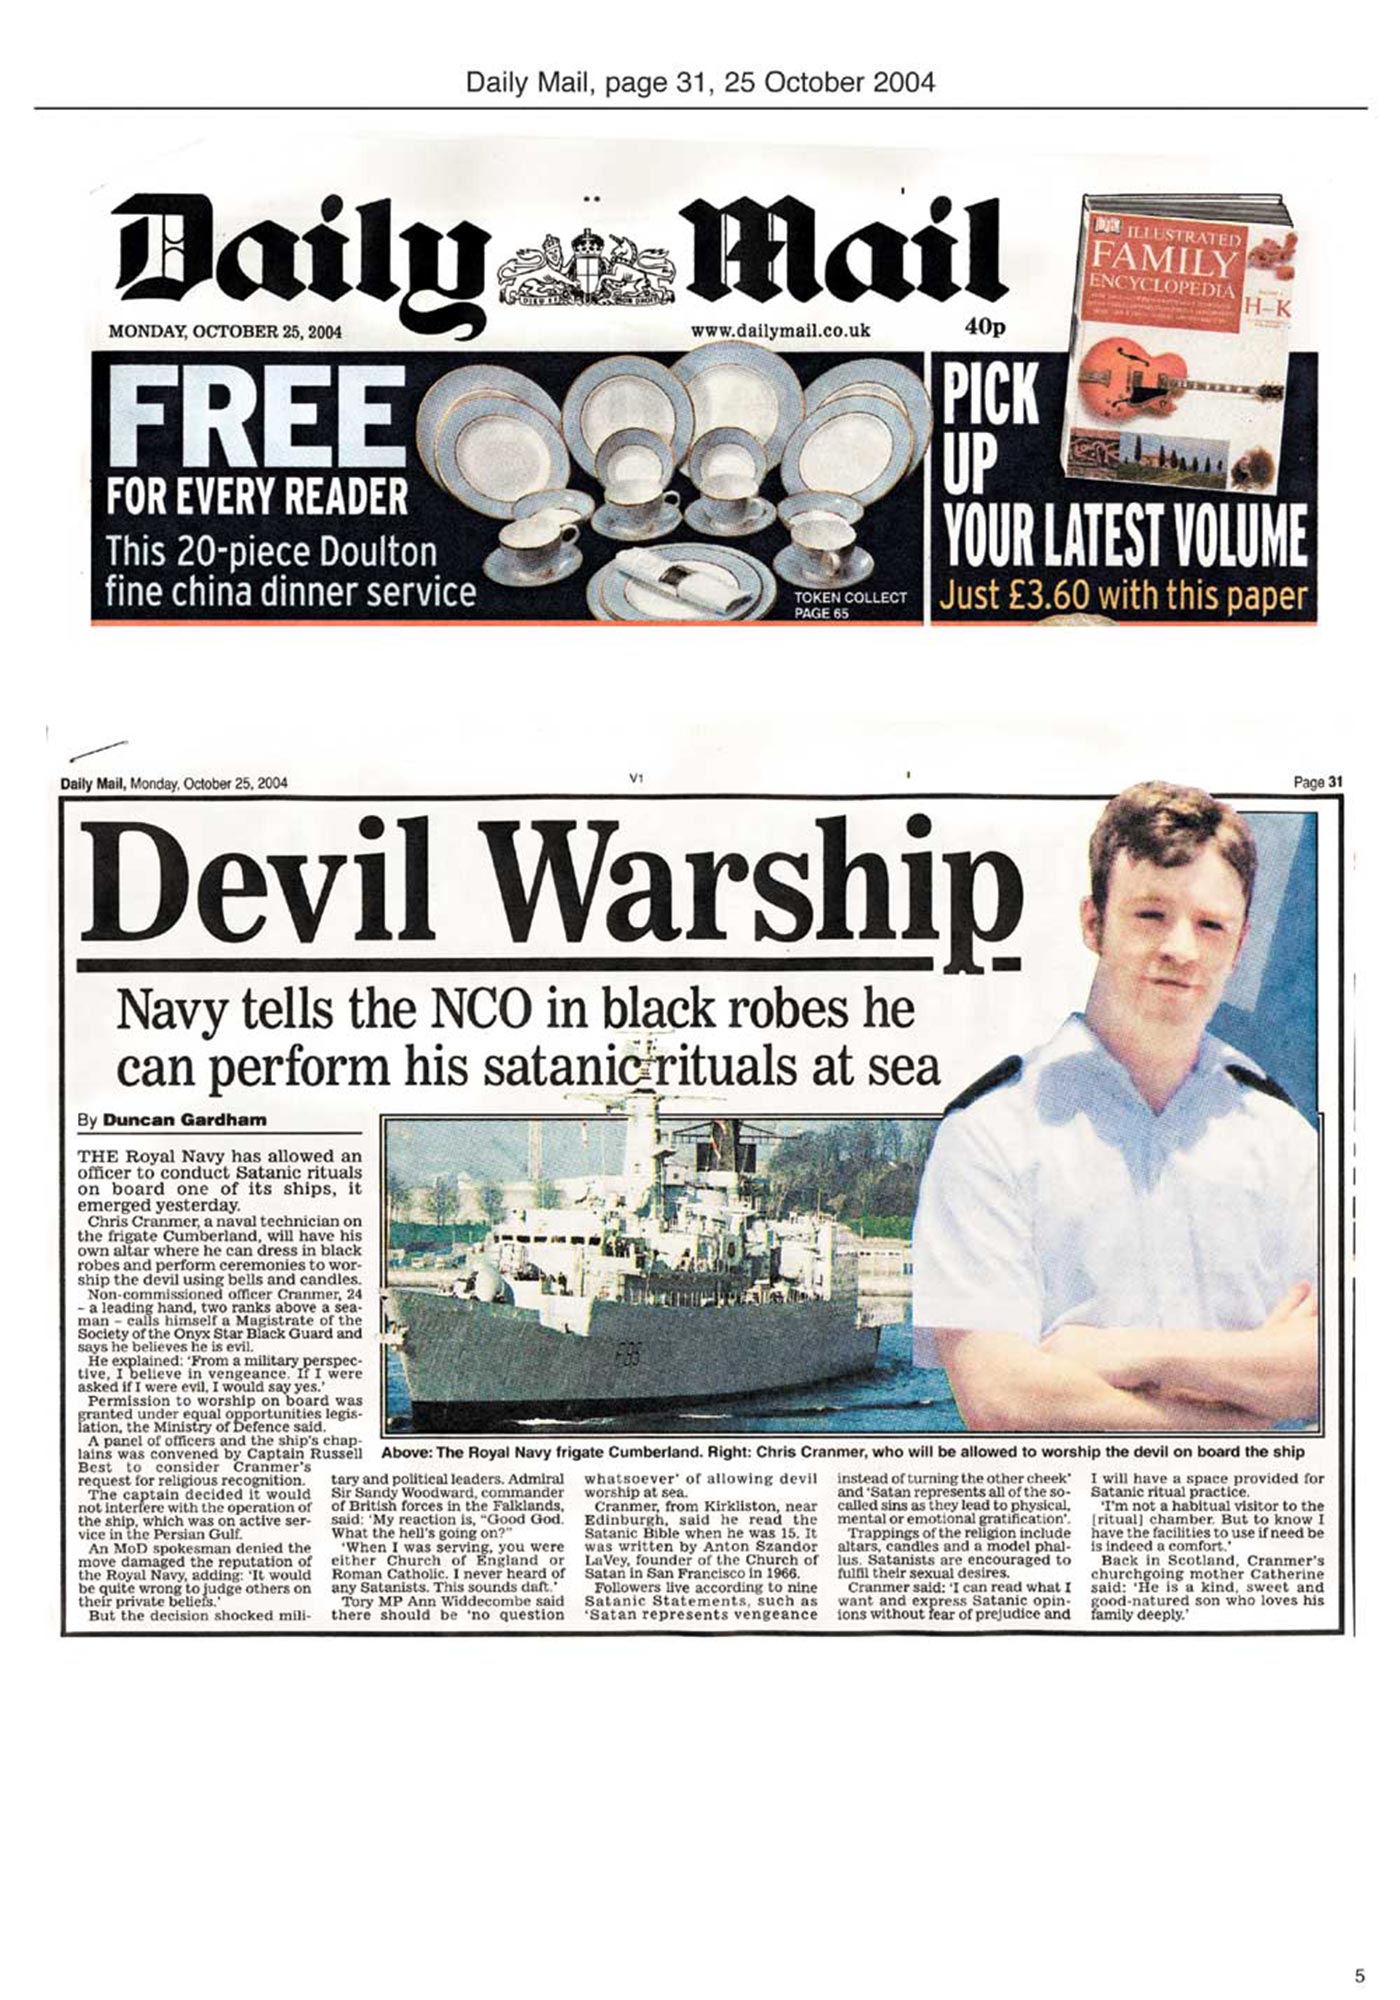 The Daily Express October 2004